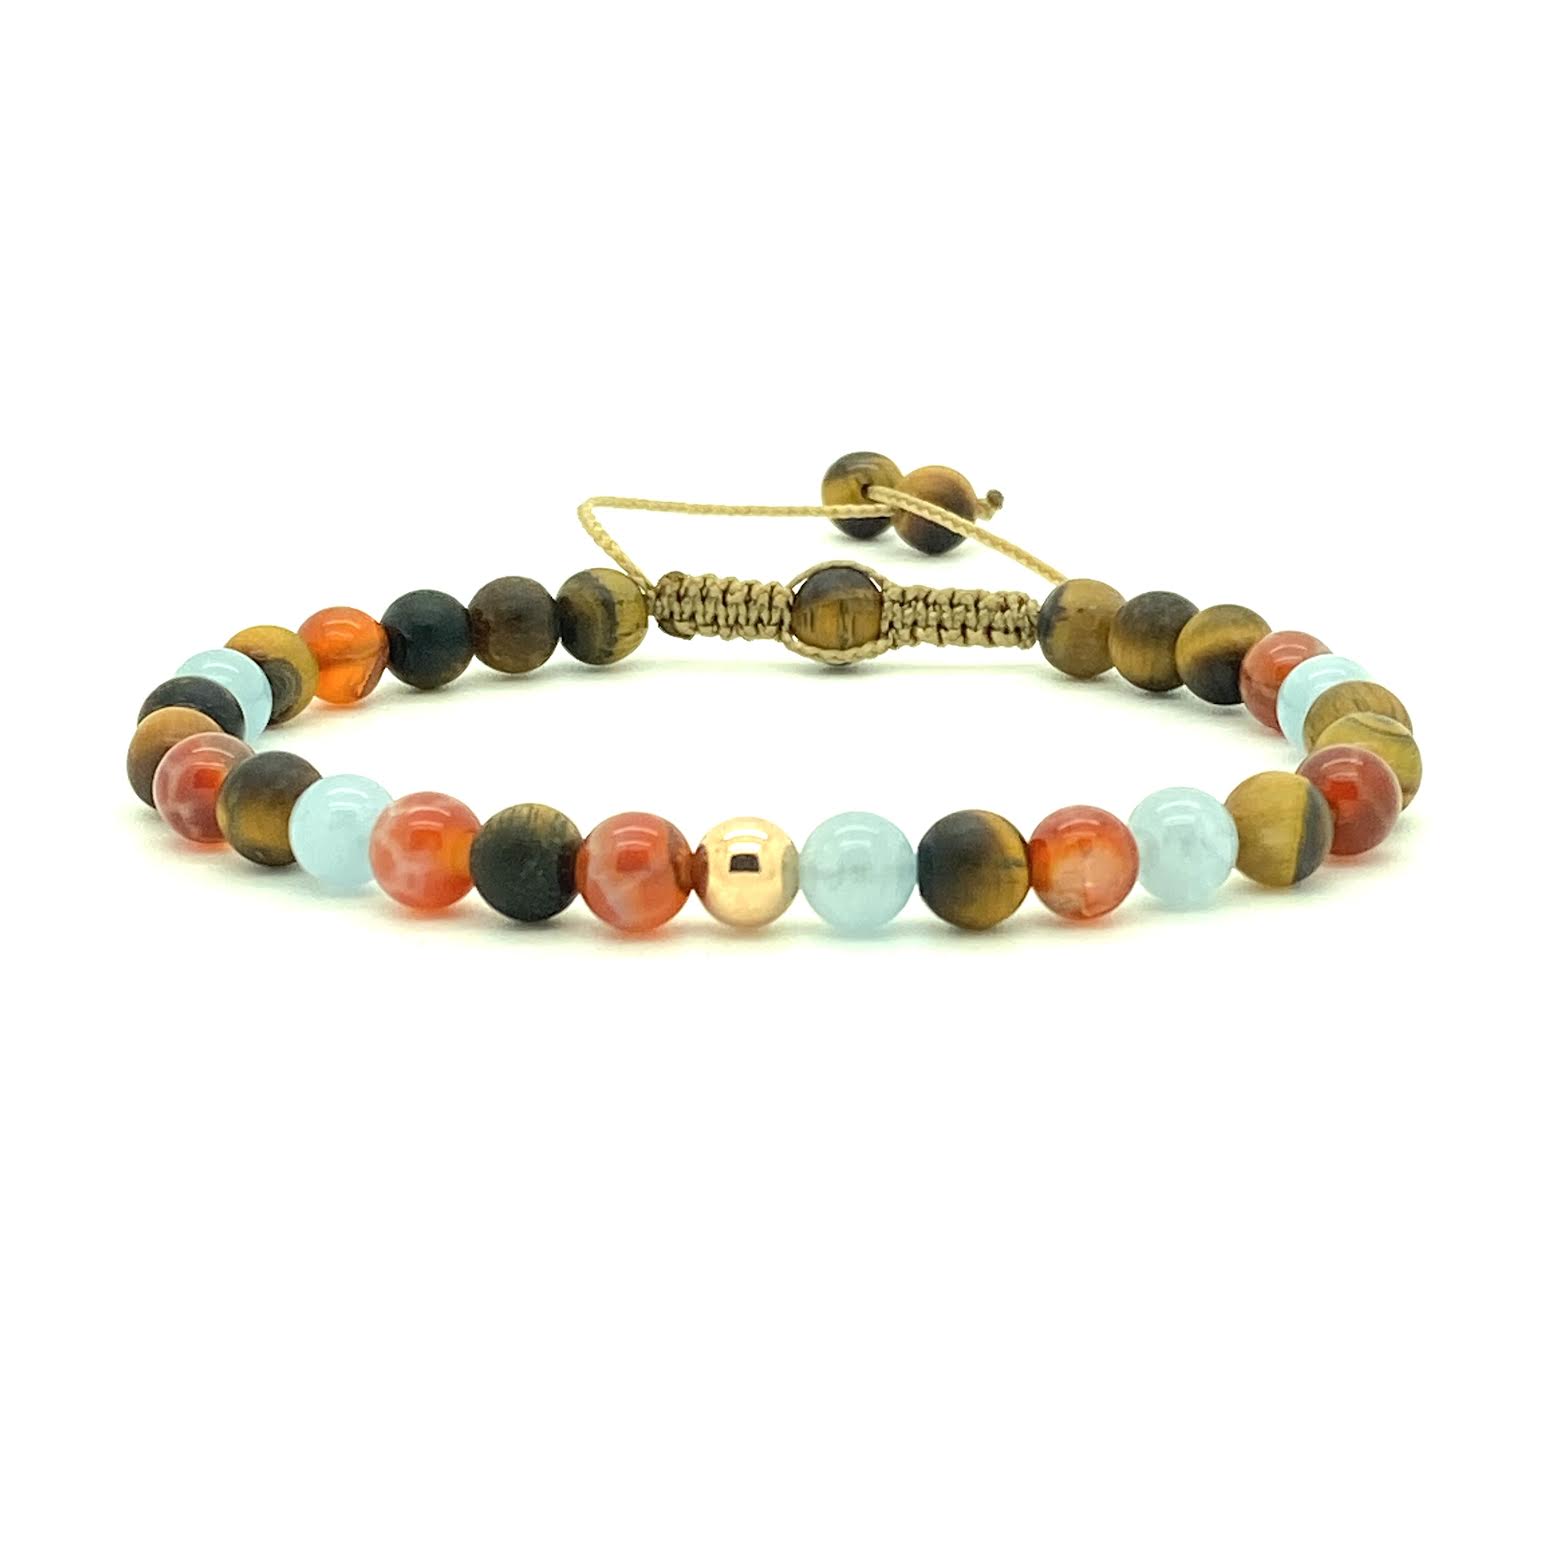 Tiger's Eye is a powerful stone that helps to release fear and anxiety and aids harmony and balance. Paired with Fire Agate and Aquamarine gemstones, with your choice of 14K white, yellow or rose gold bead. Hand knotted adjustable cord for a perfect fit. Made by WristBend